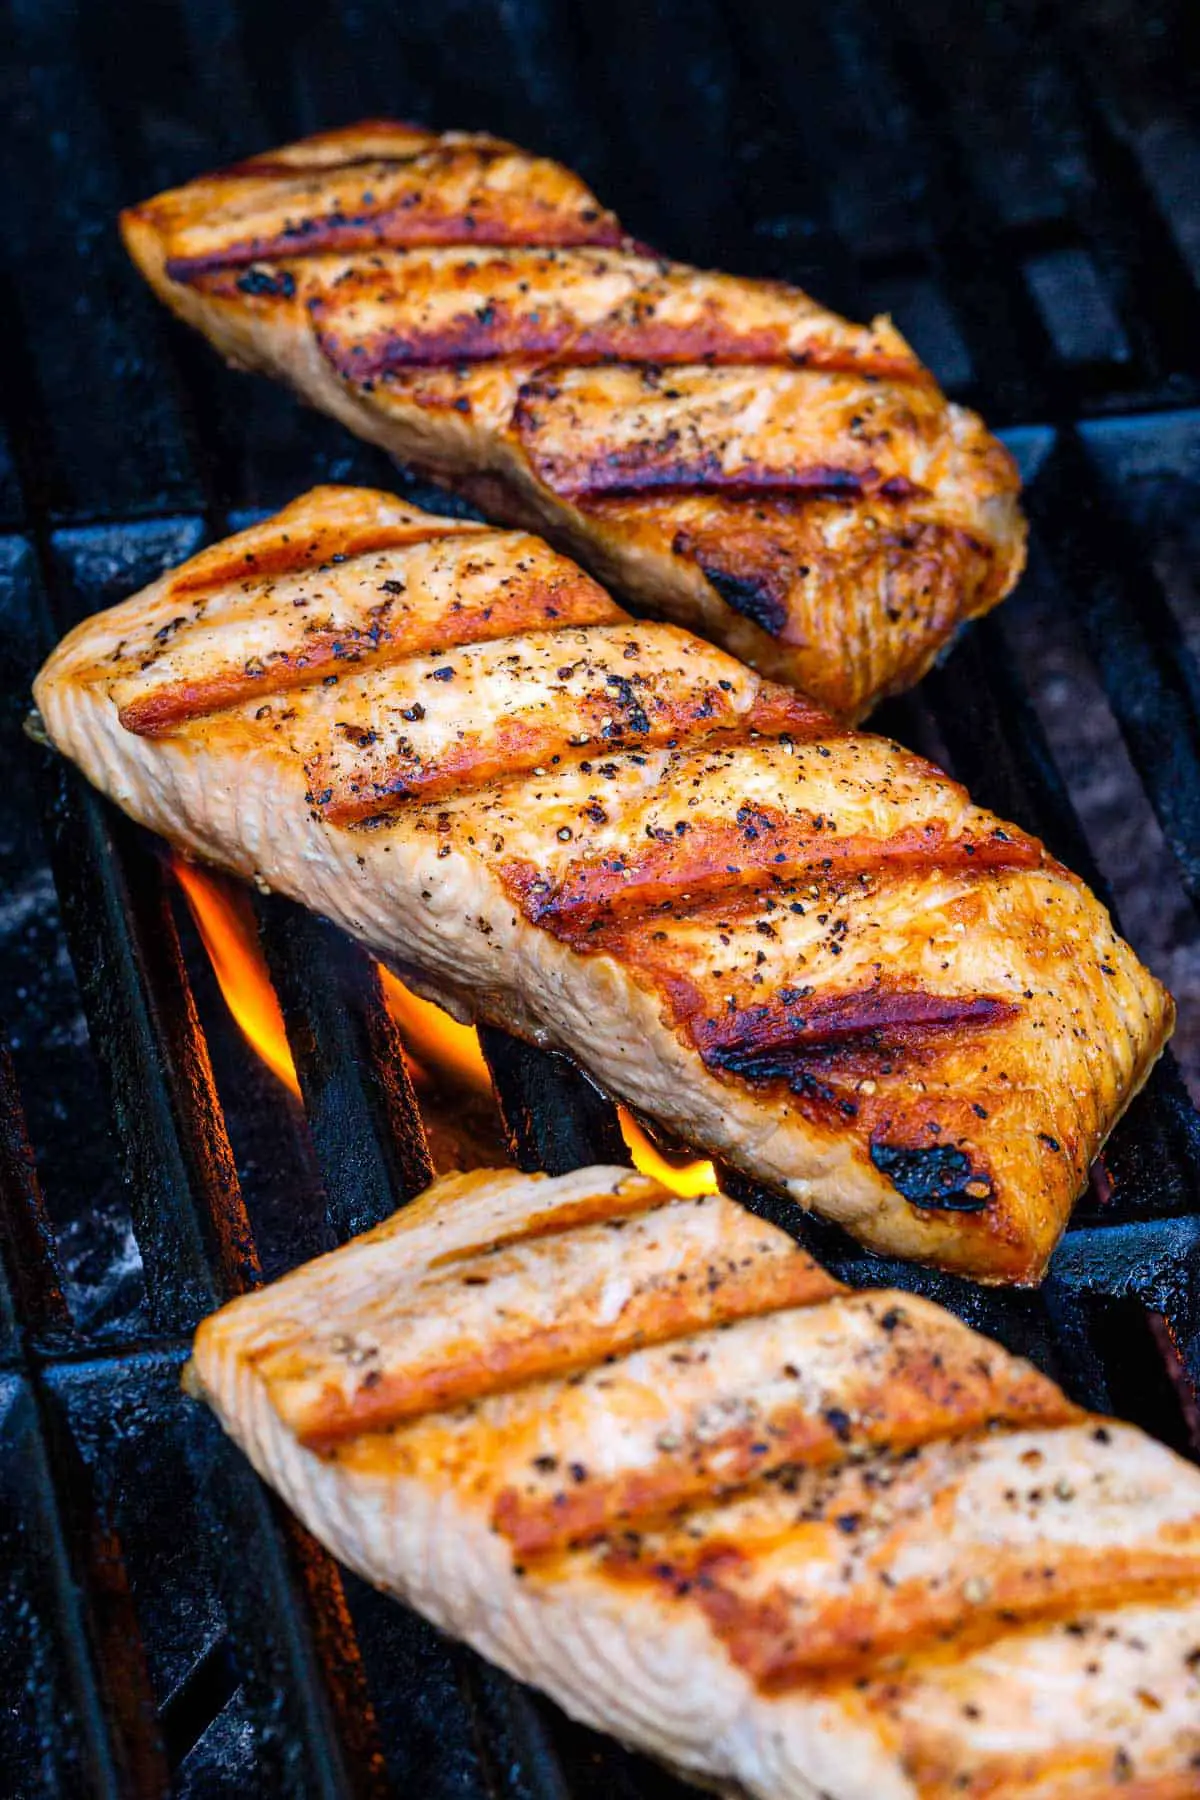 How Long to Cook Salmon on Gas Grill